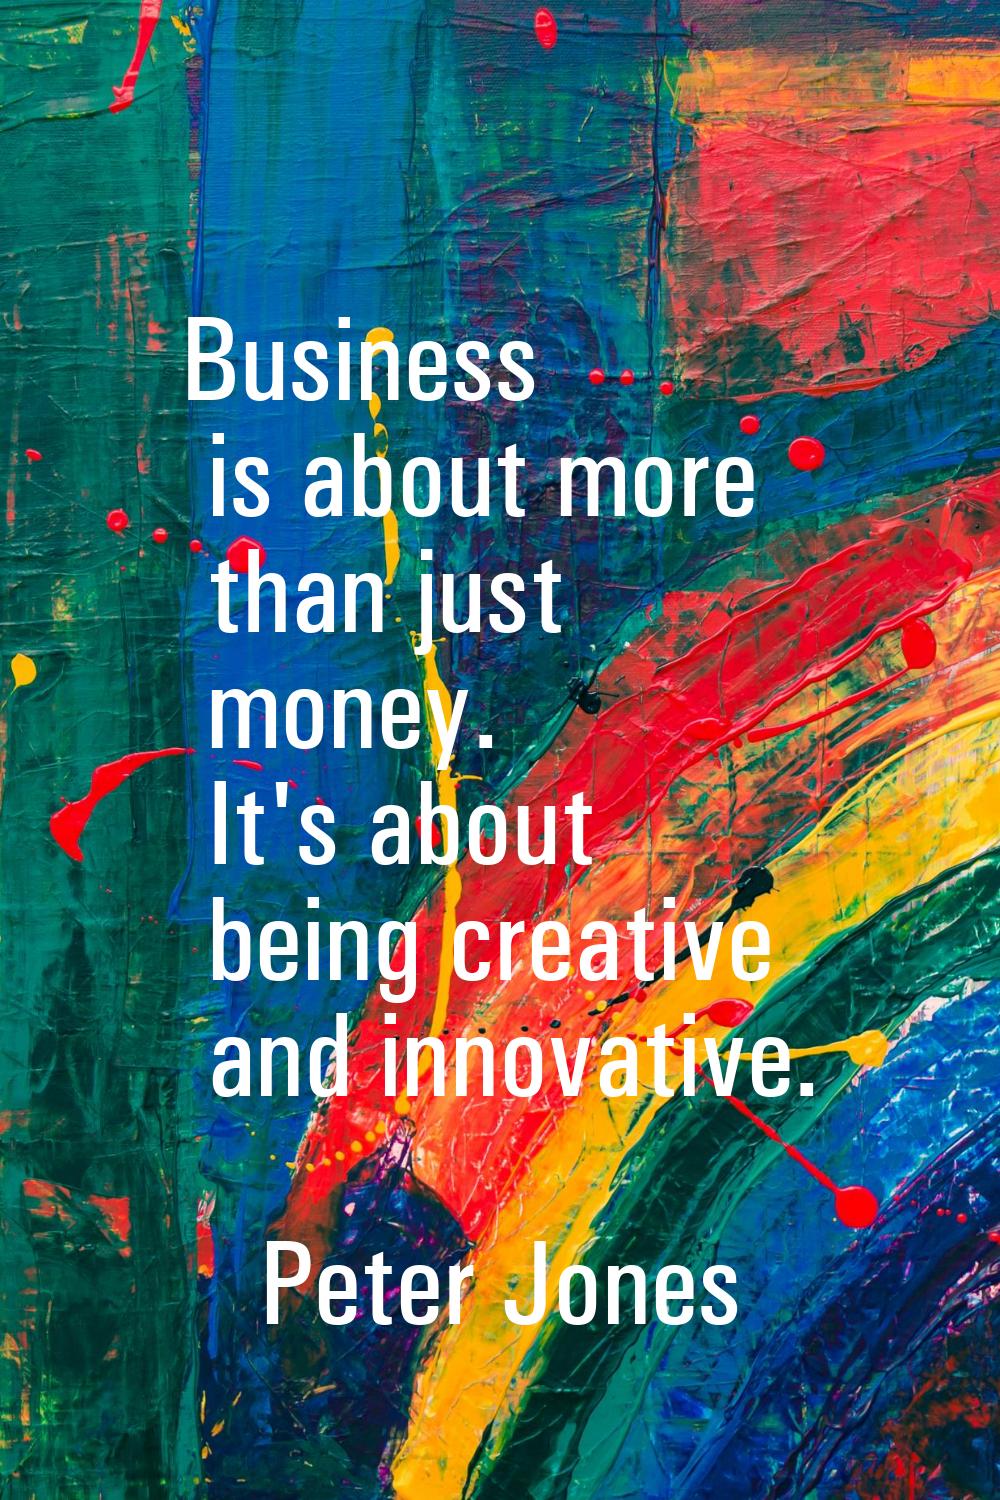 Business is about more than just money. It's about being creative and innovative.